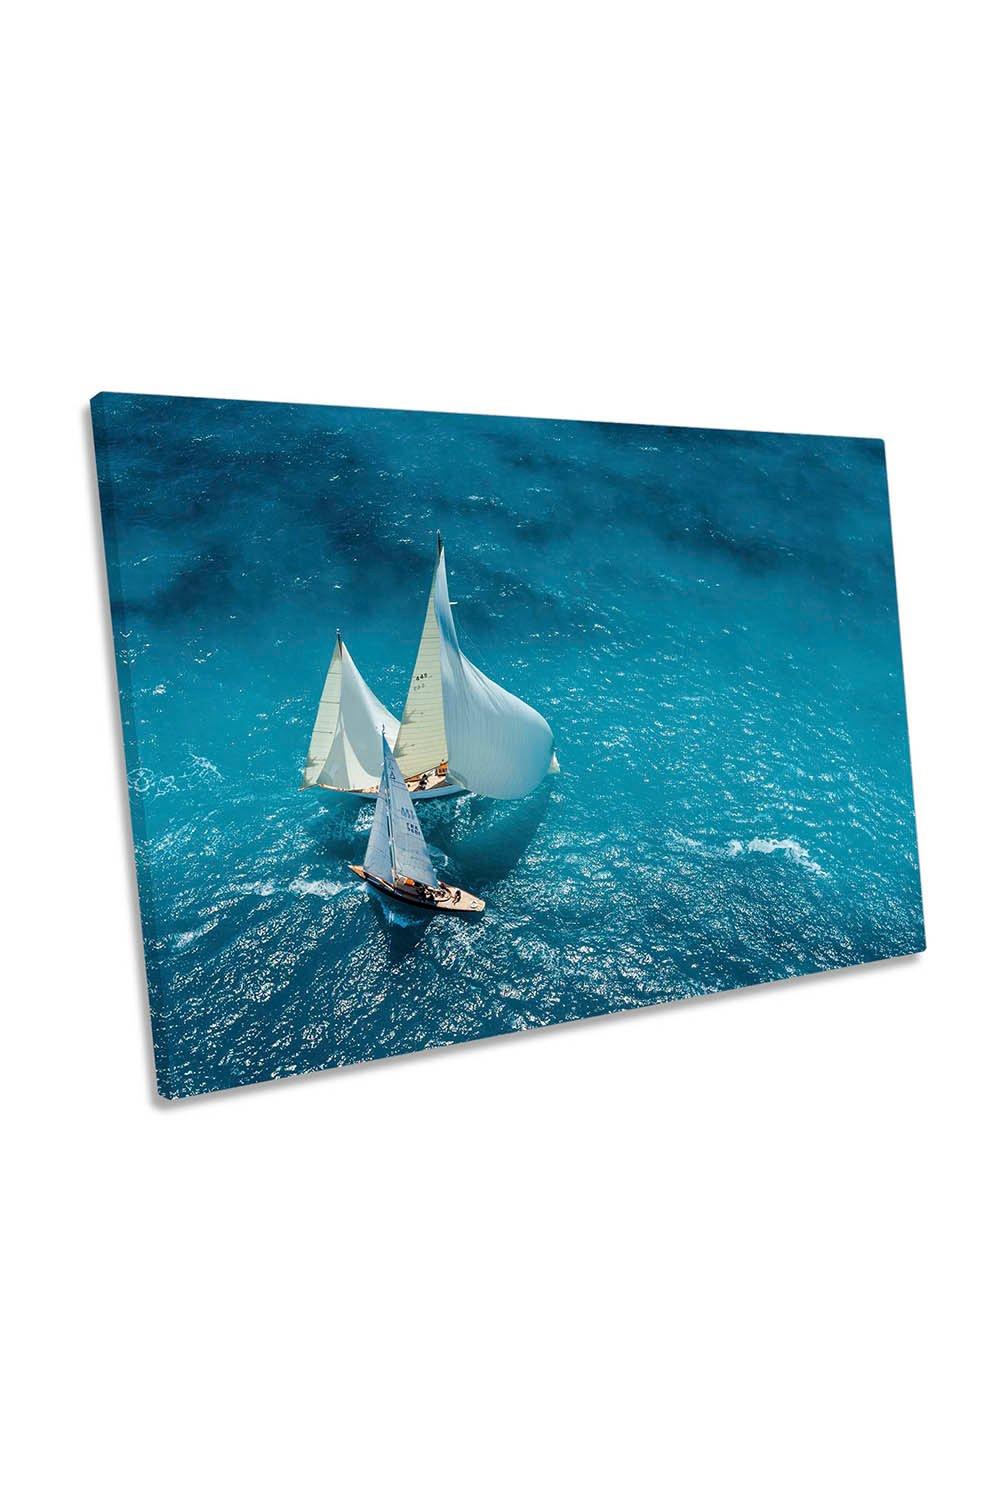 Sail Boat Yacht Race Ocean Canvas Wall Art Picture Print